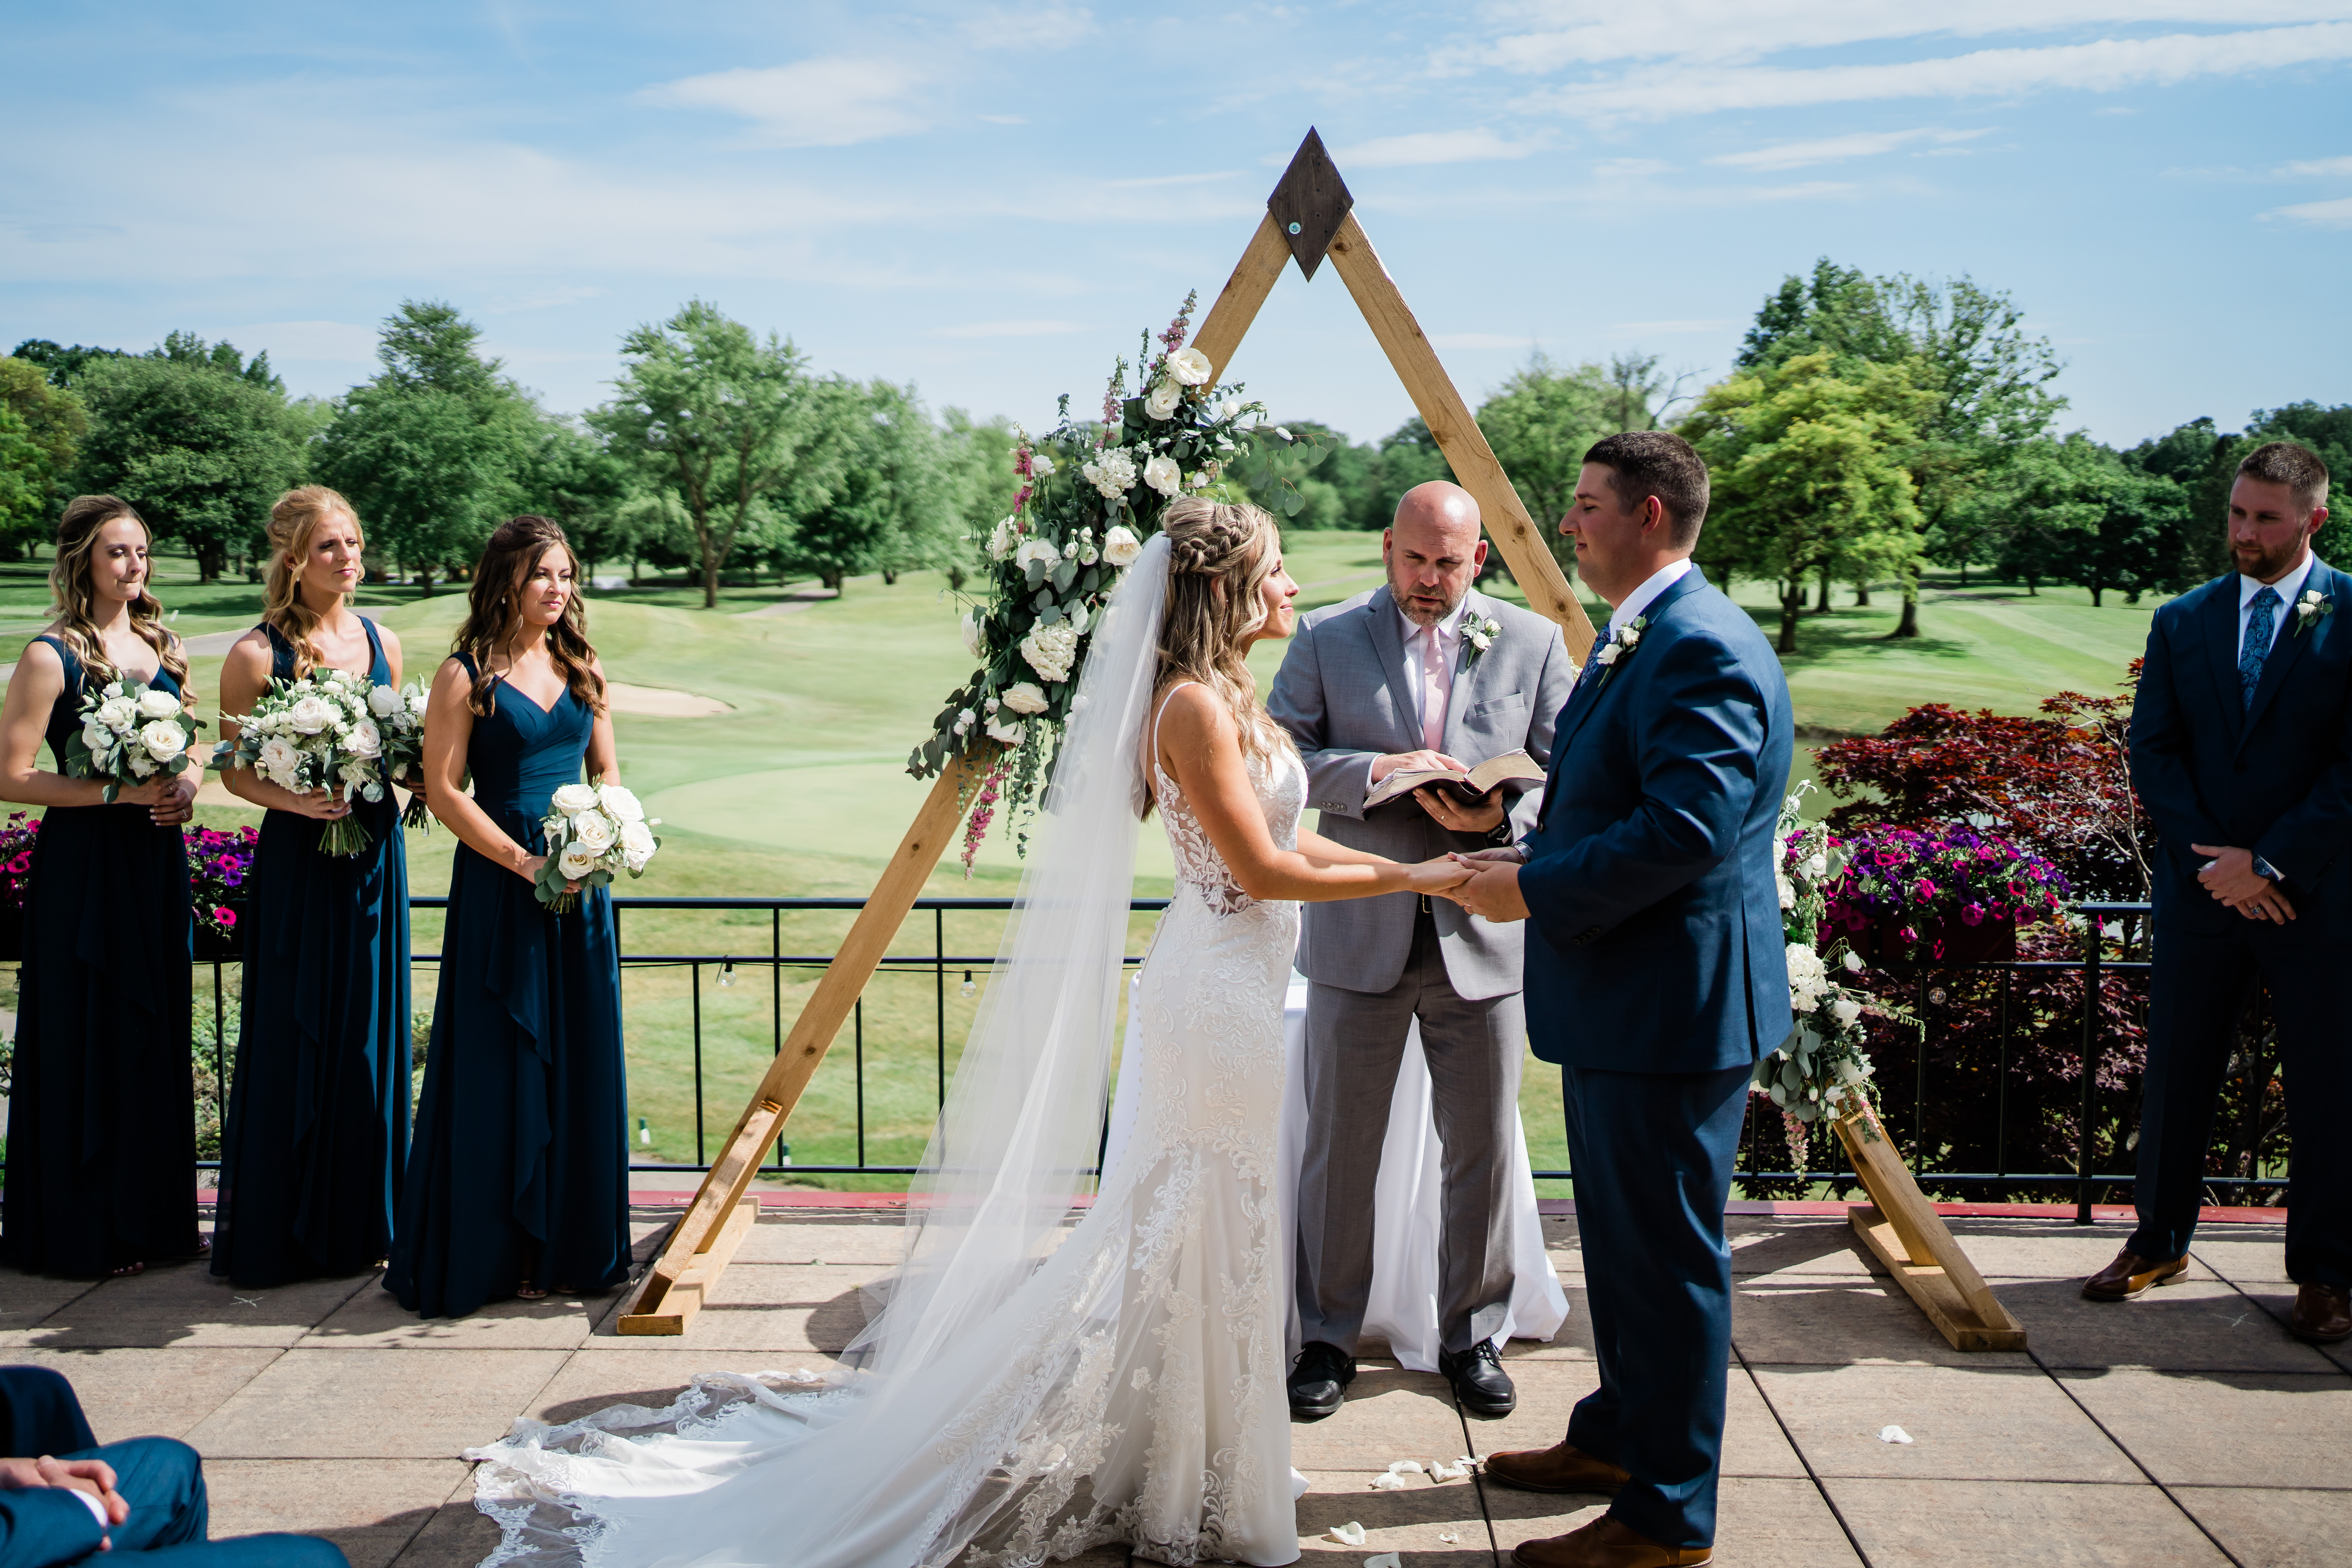 Fort Wayne wedding photographers capture bride and groom at alter before stunning country club wedding